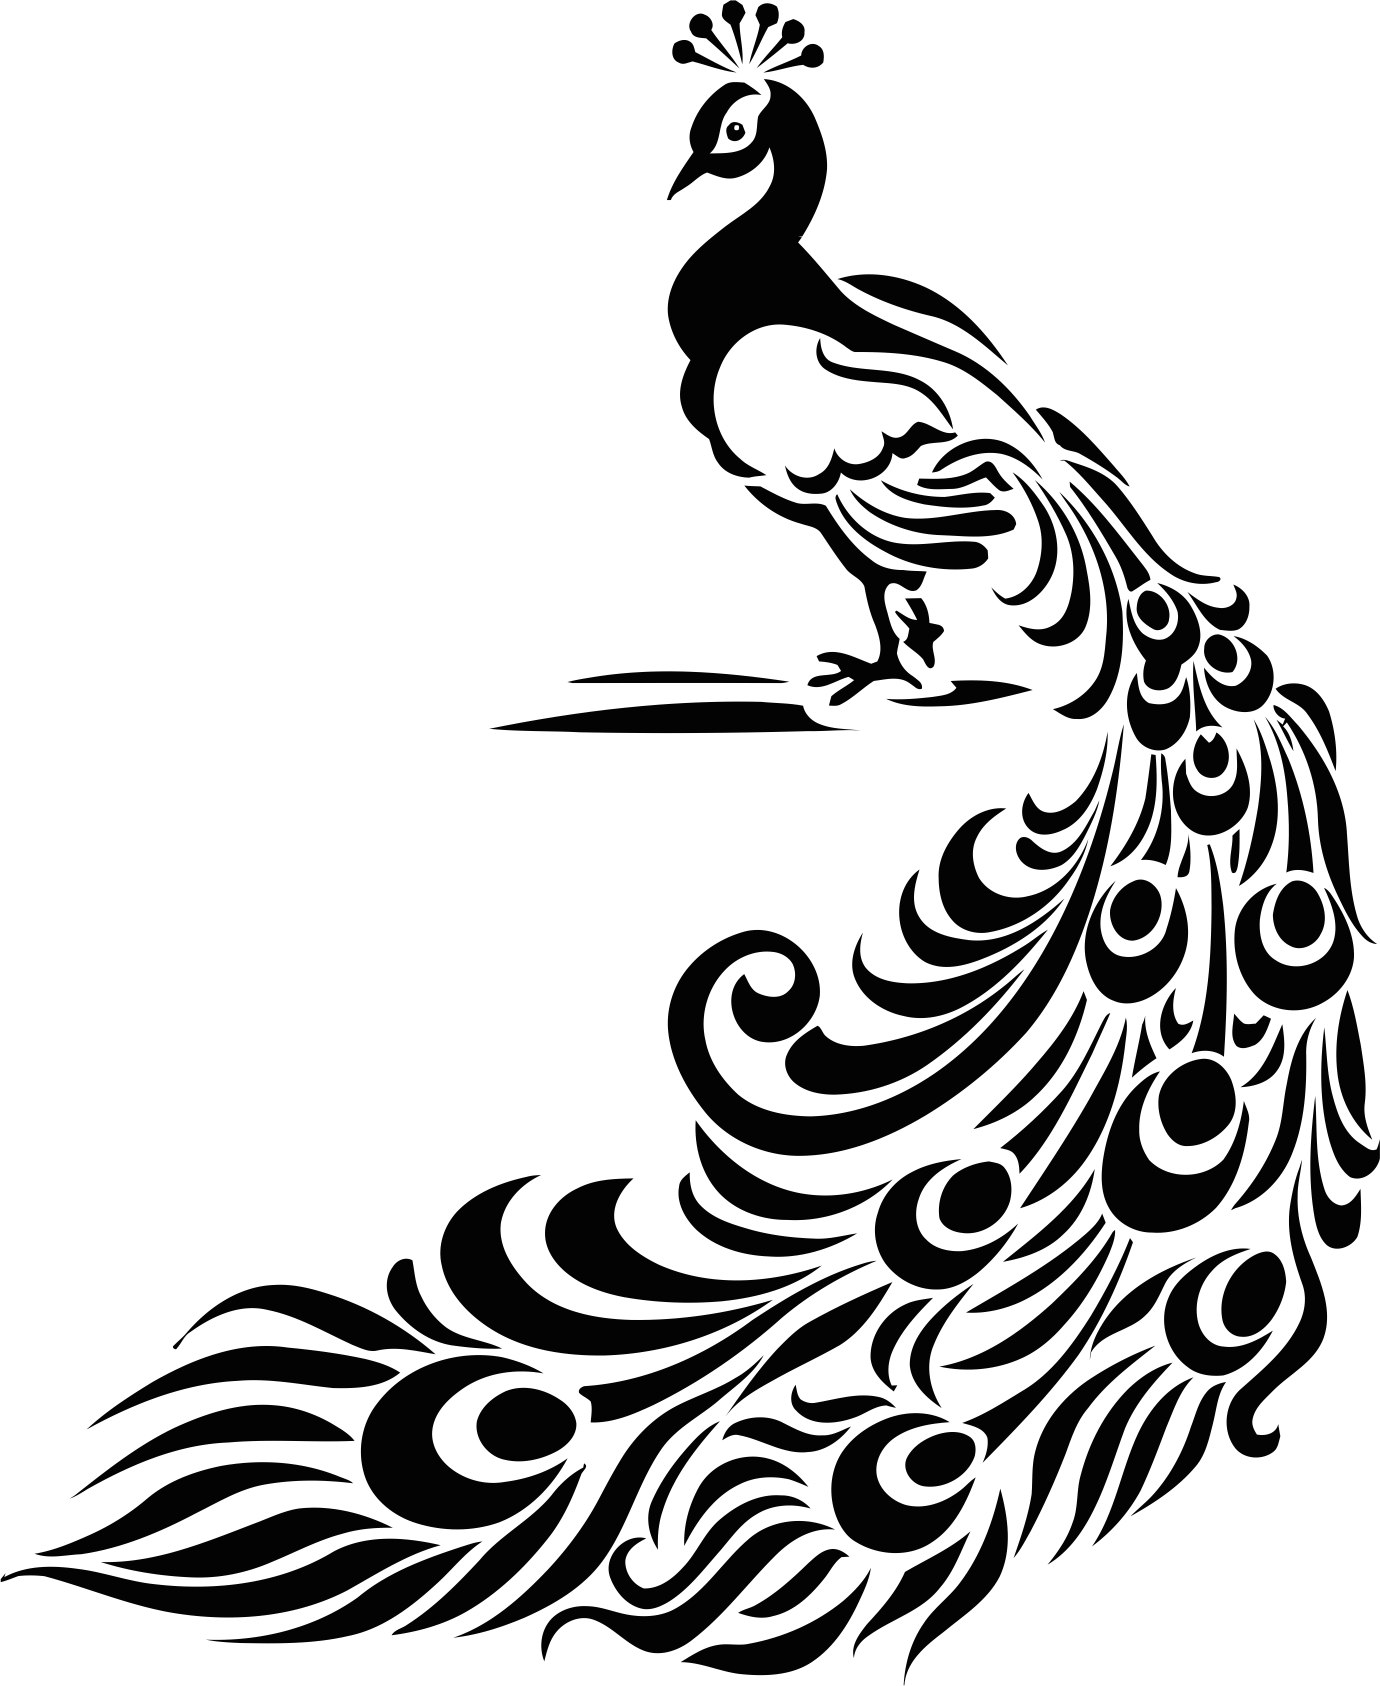 peacock silhouette free vector